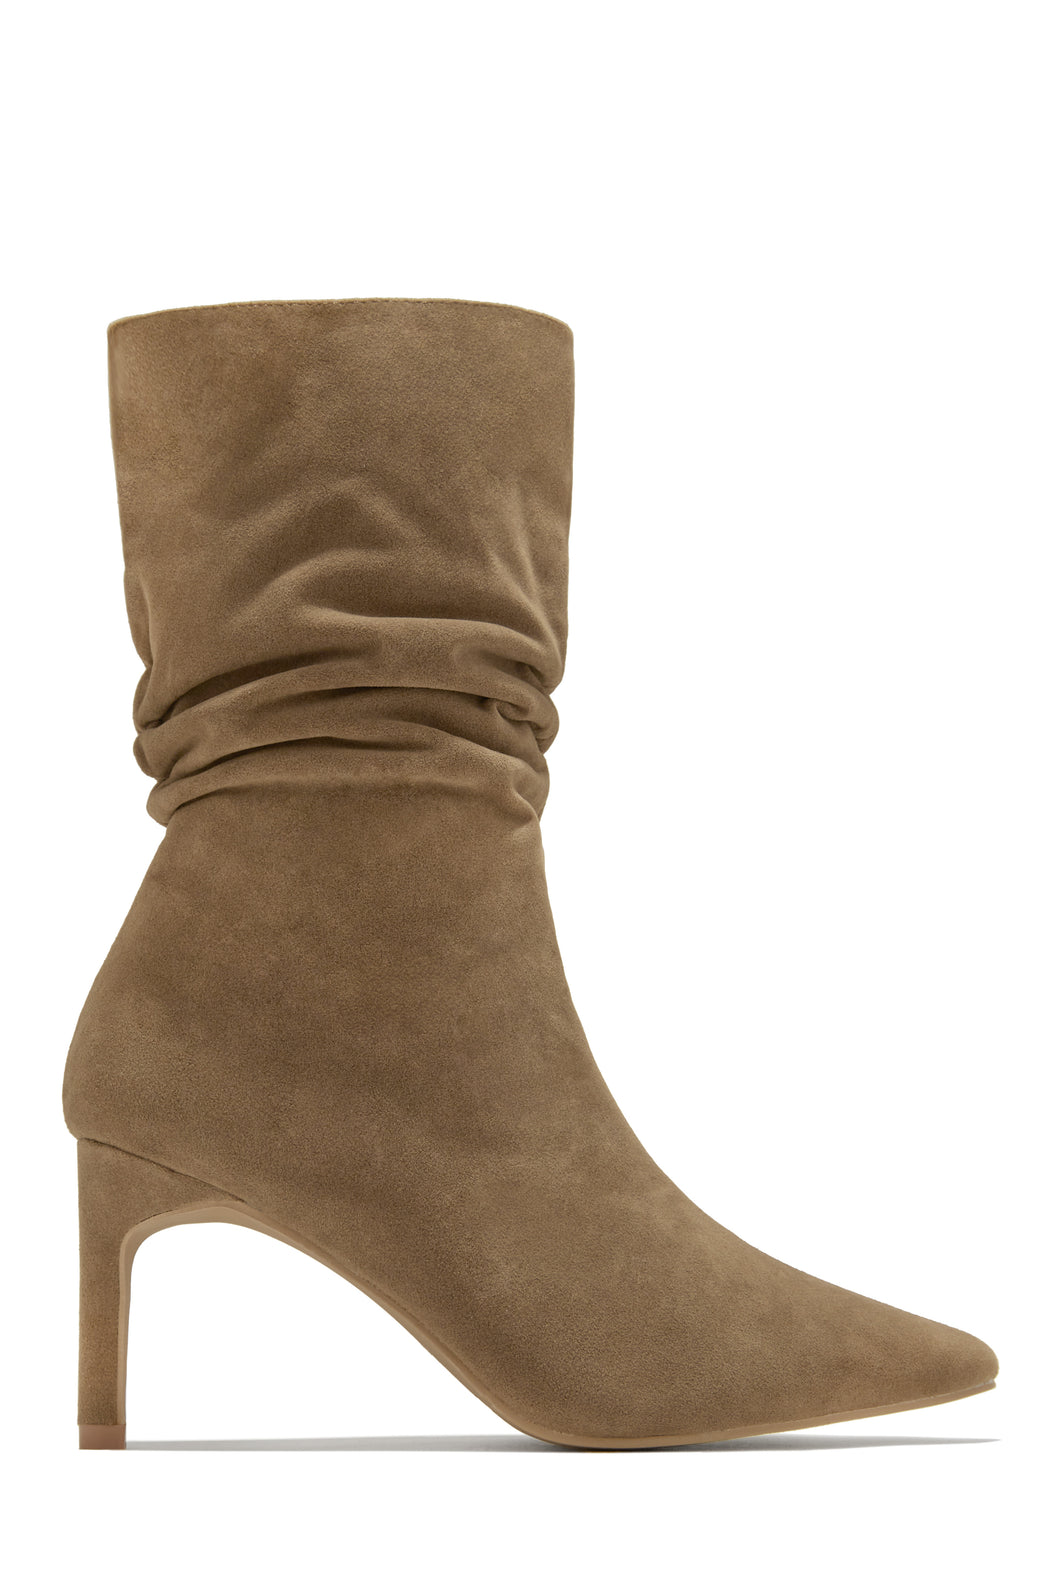 Arabella Above The Ankle Boots - Taupe